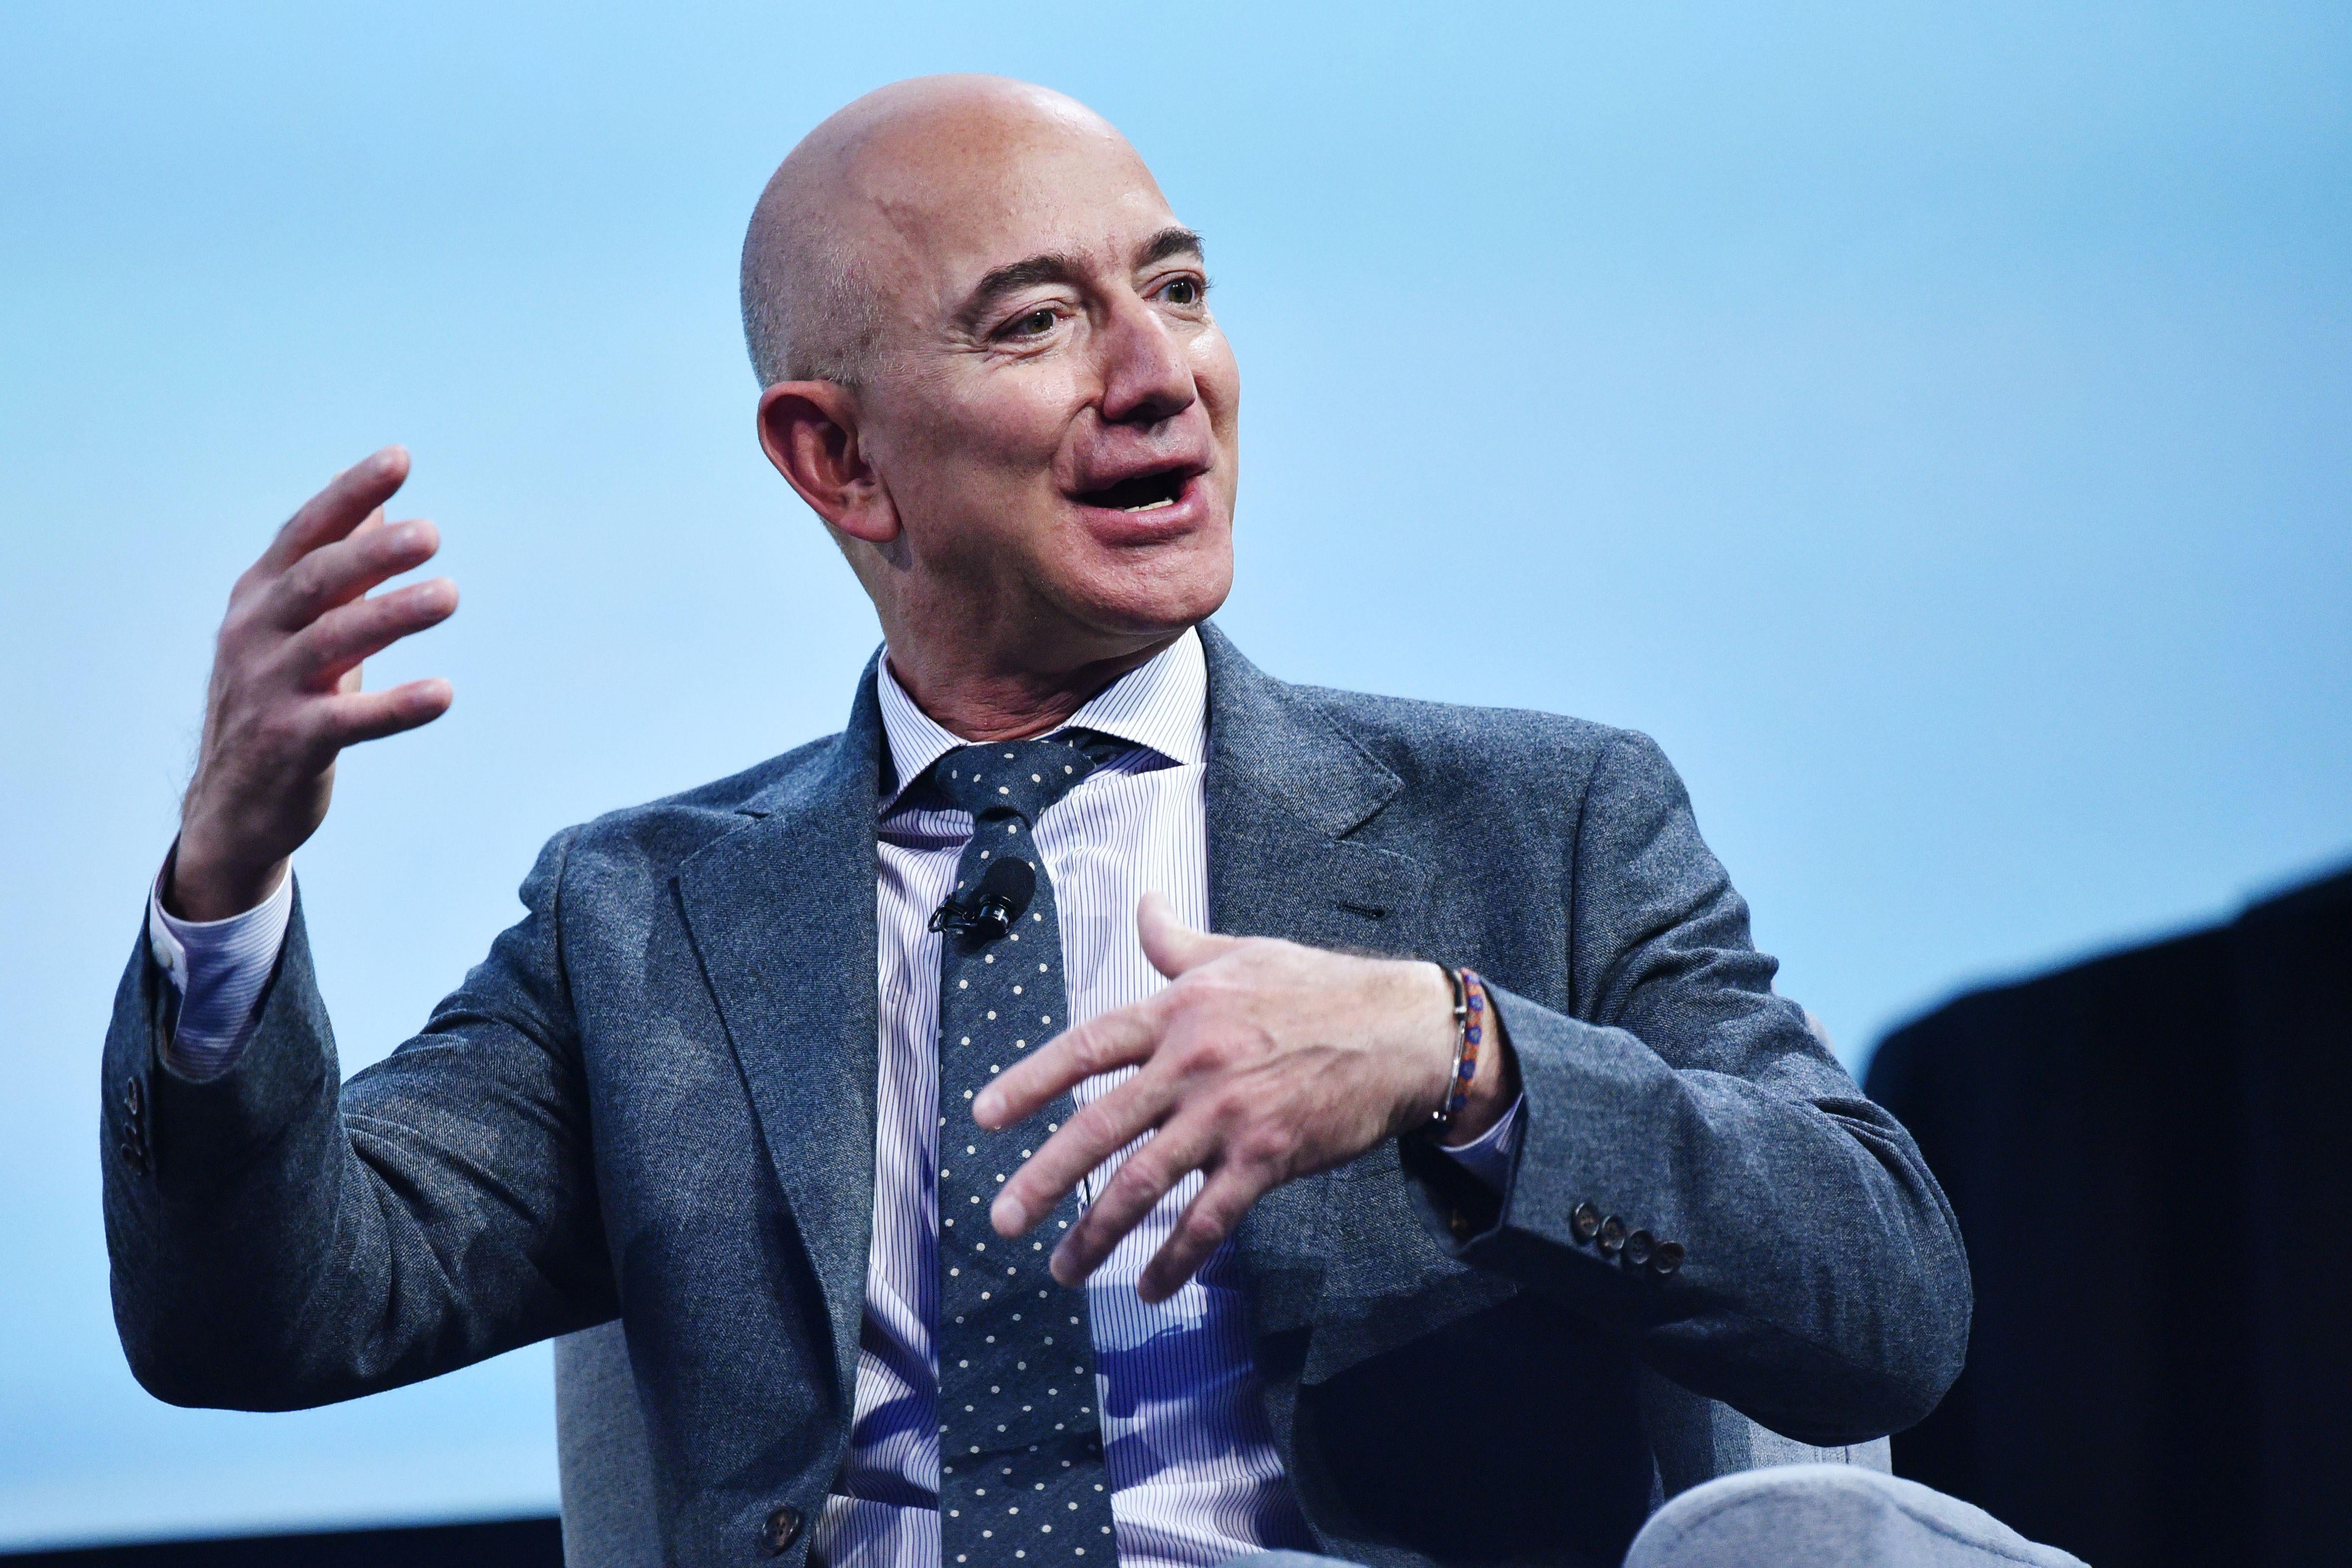 Jeff Bezos gestures with both hands while sitting in front of a light-blue screen.